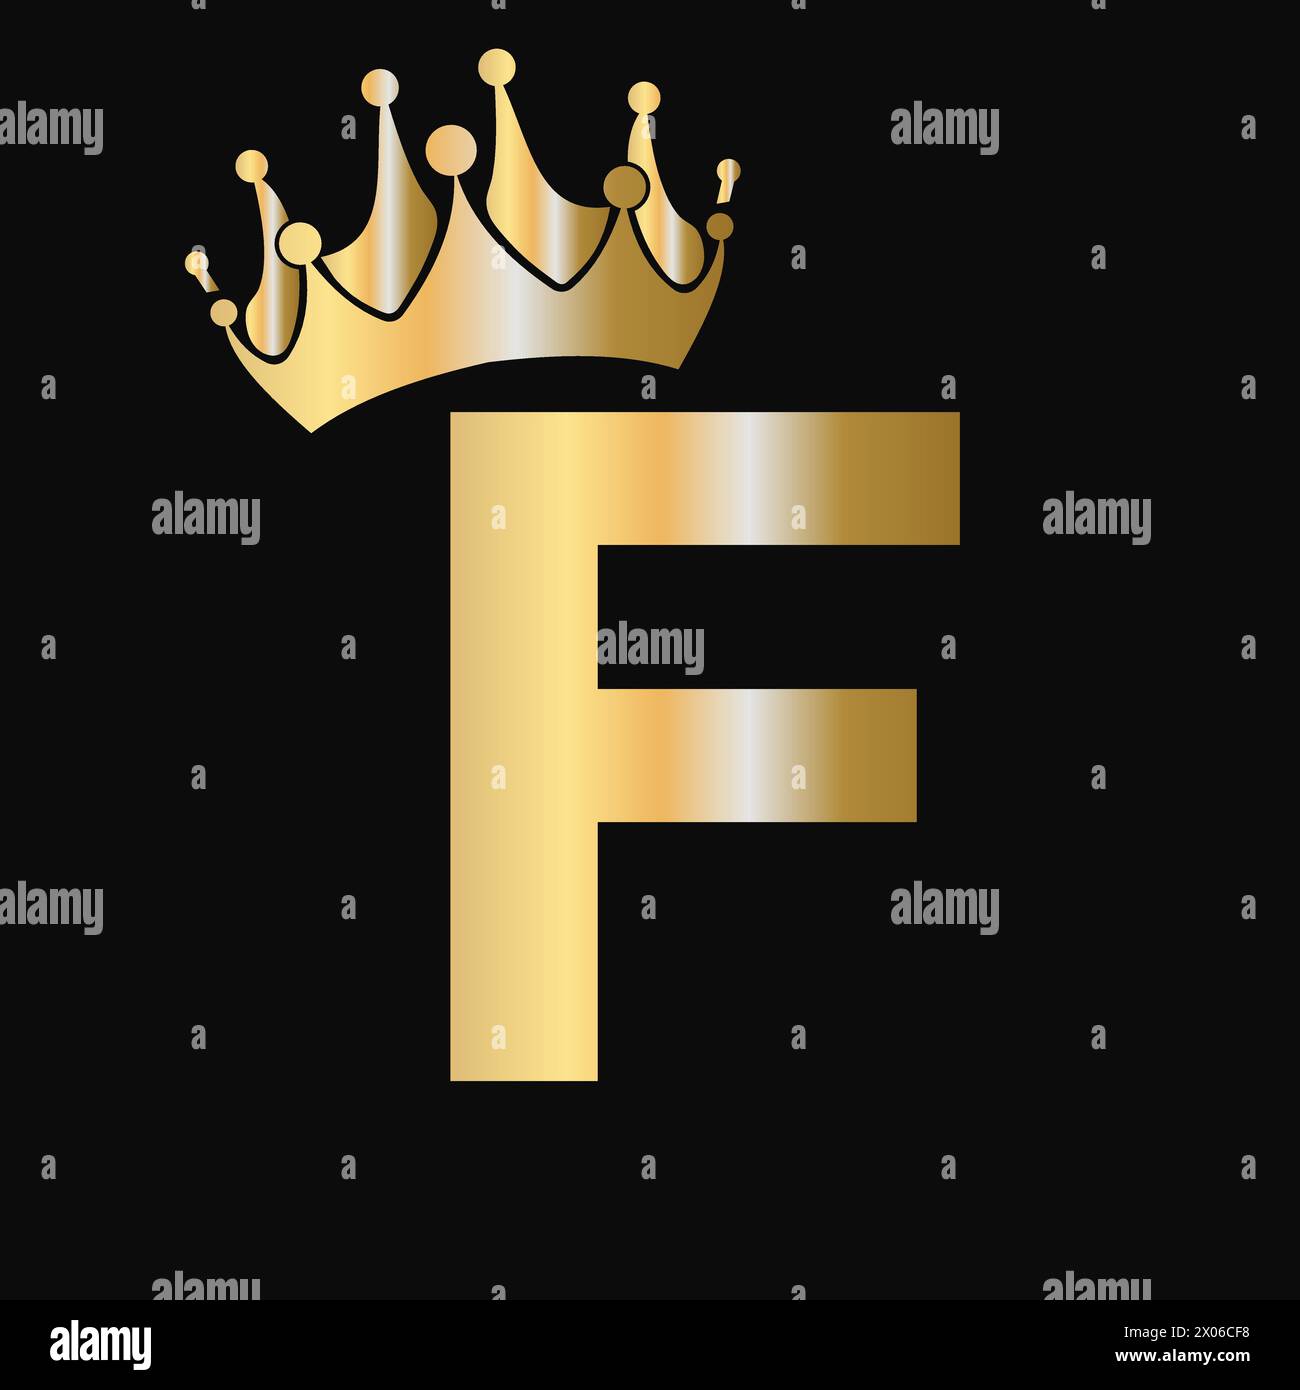 Letter F Crown Logo Template. Royal Crown Logotype Luxury Sign  for Beauty, Fashion, Star, Elegant Symbol Stock Vector